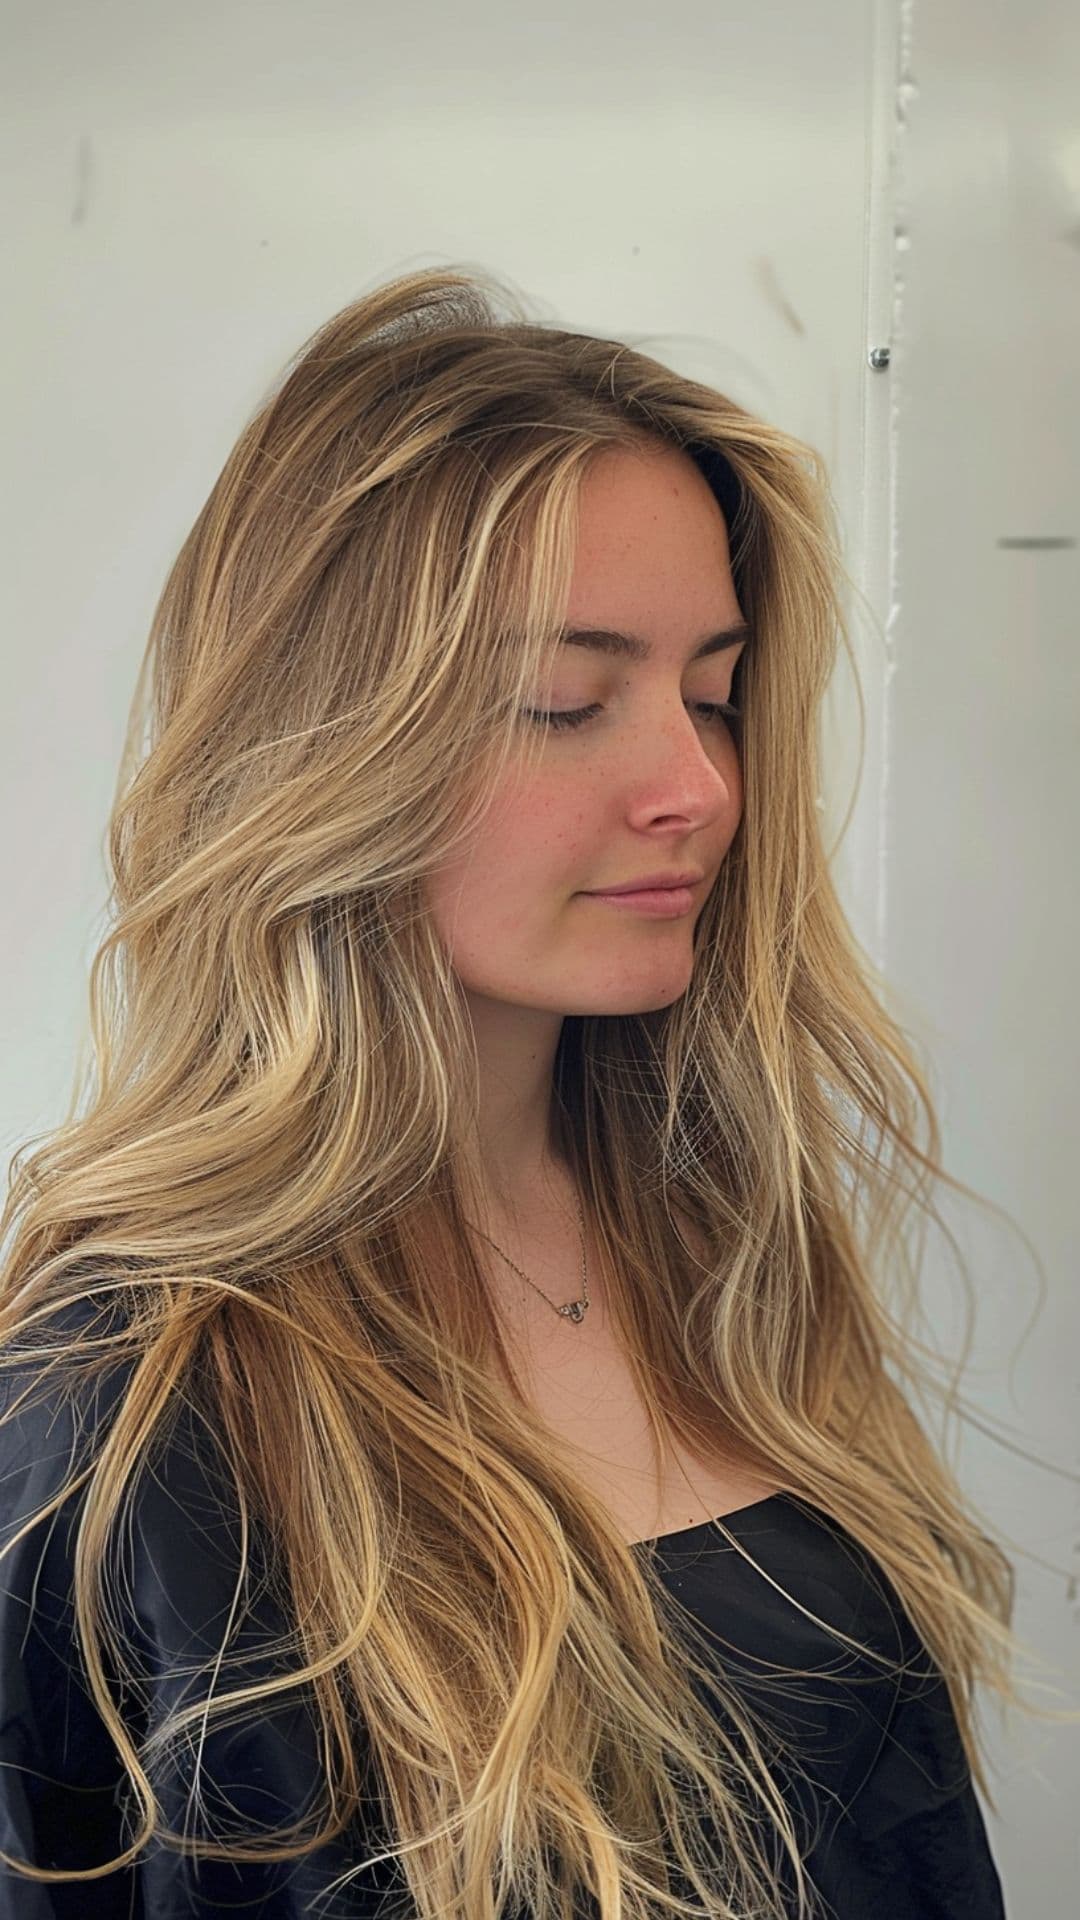 A woman modelling a beachy blonde highlights hairstyle.